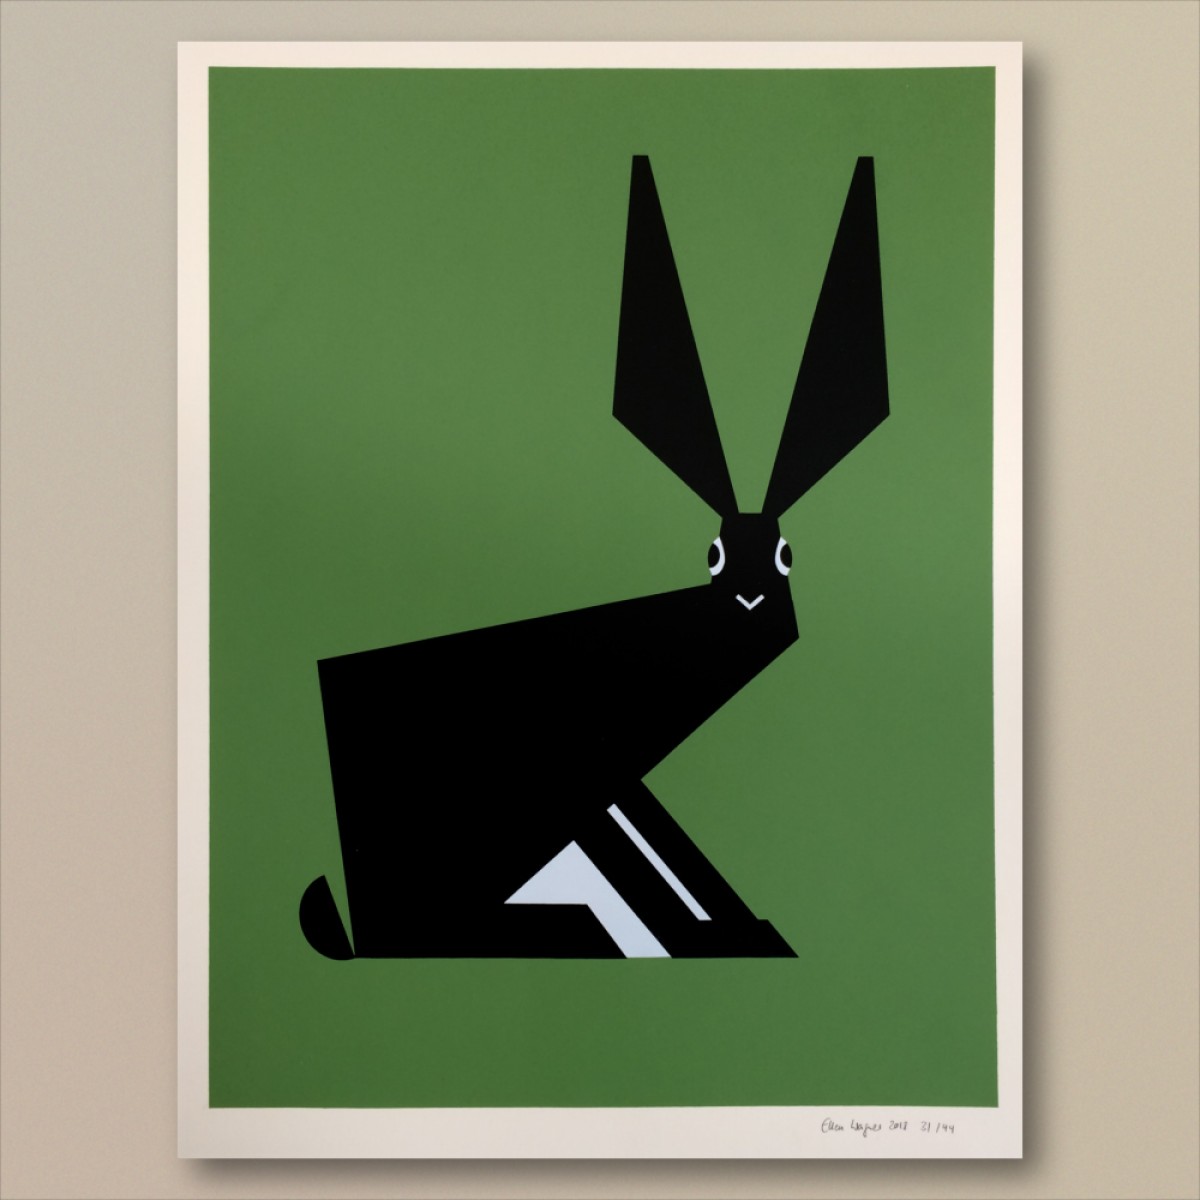 Print now - Riot later
Abstract Rabbit